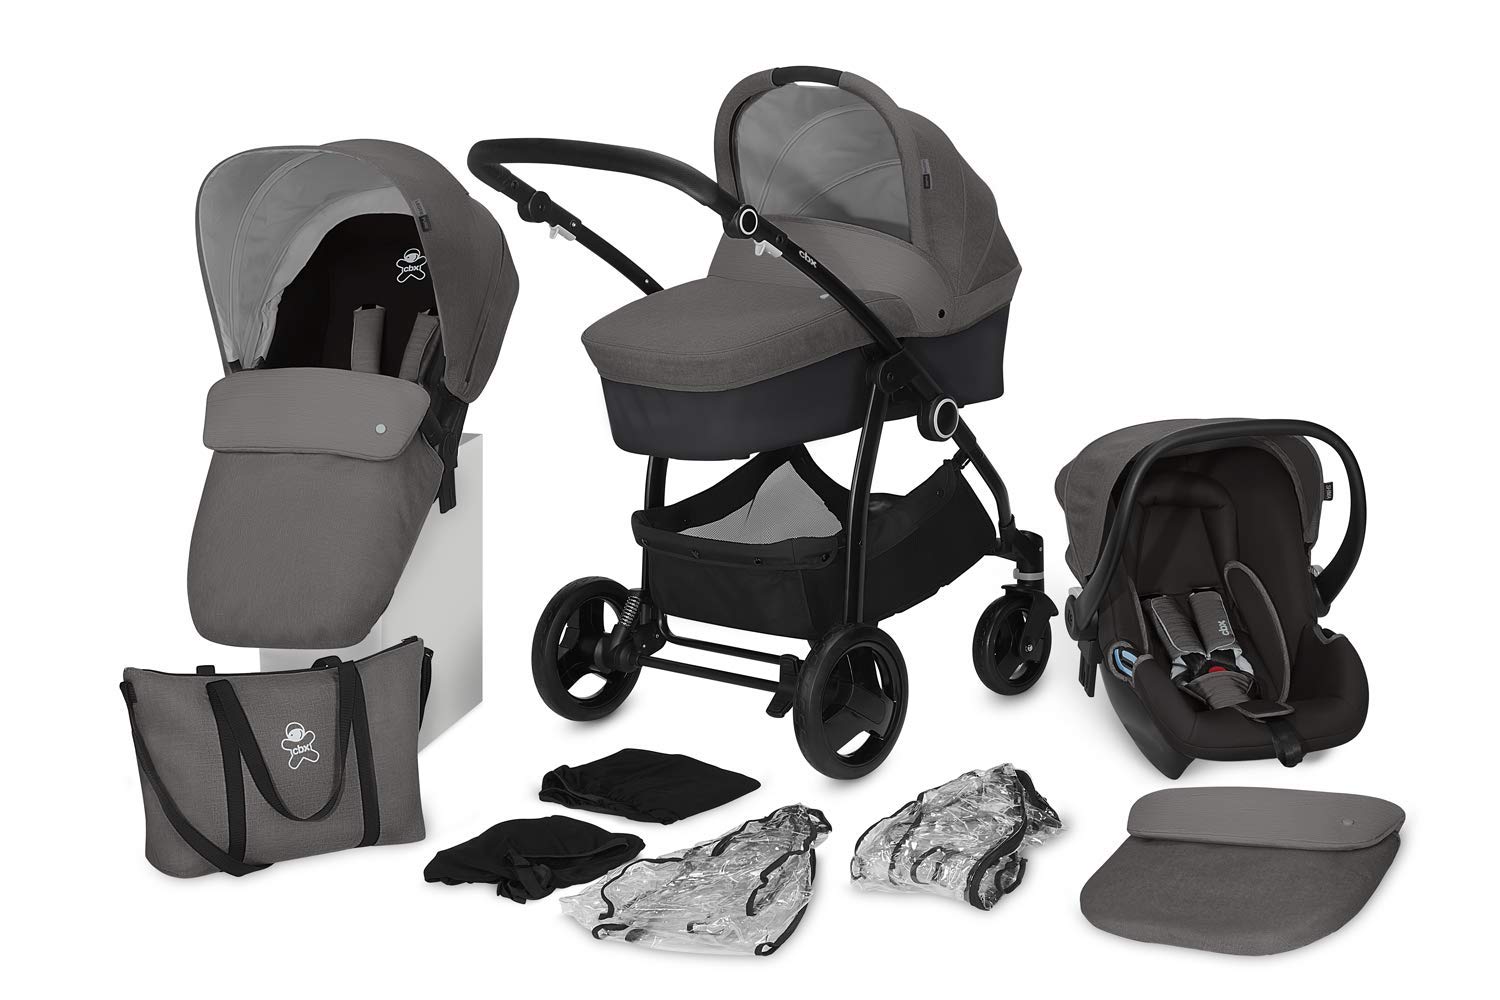 cbx 3-in-1 Leotie Pure 12-Piece Combi Pushchair Set with Shima Baby Seat, Reversible Seat Unit, Folding Baby Cot, 2x Rain Covers, 2x Mosquito Nets, Changing Bag, from Birth to 15 kg, Anthracite